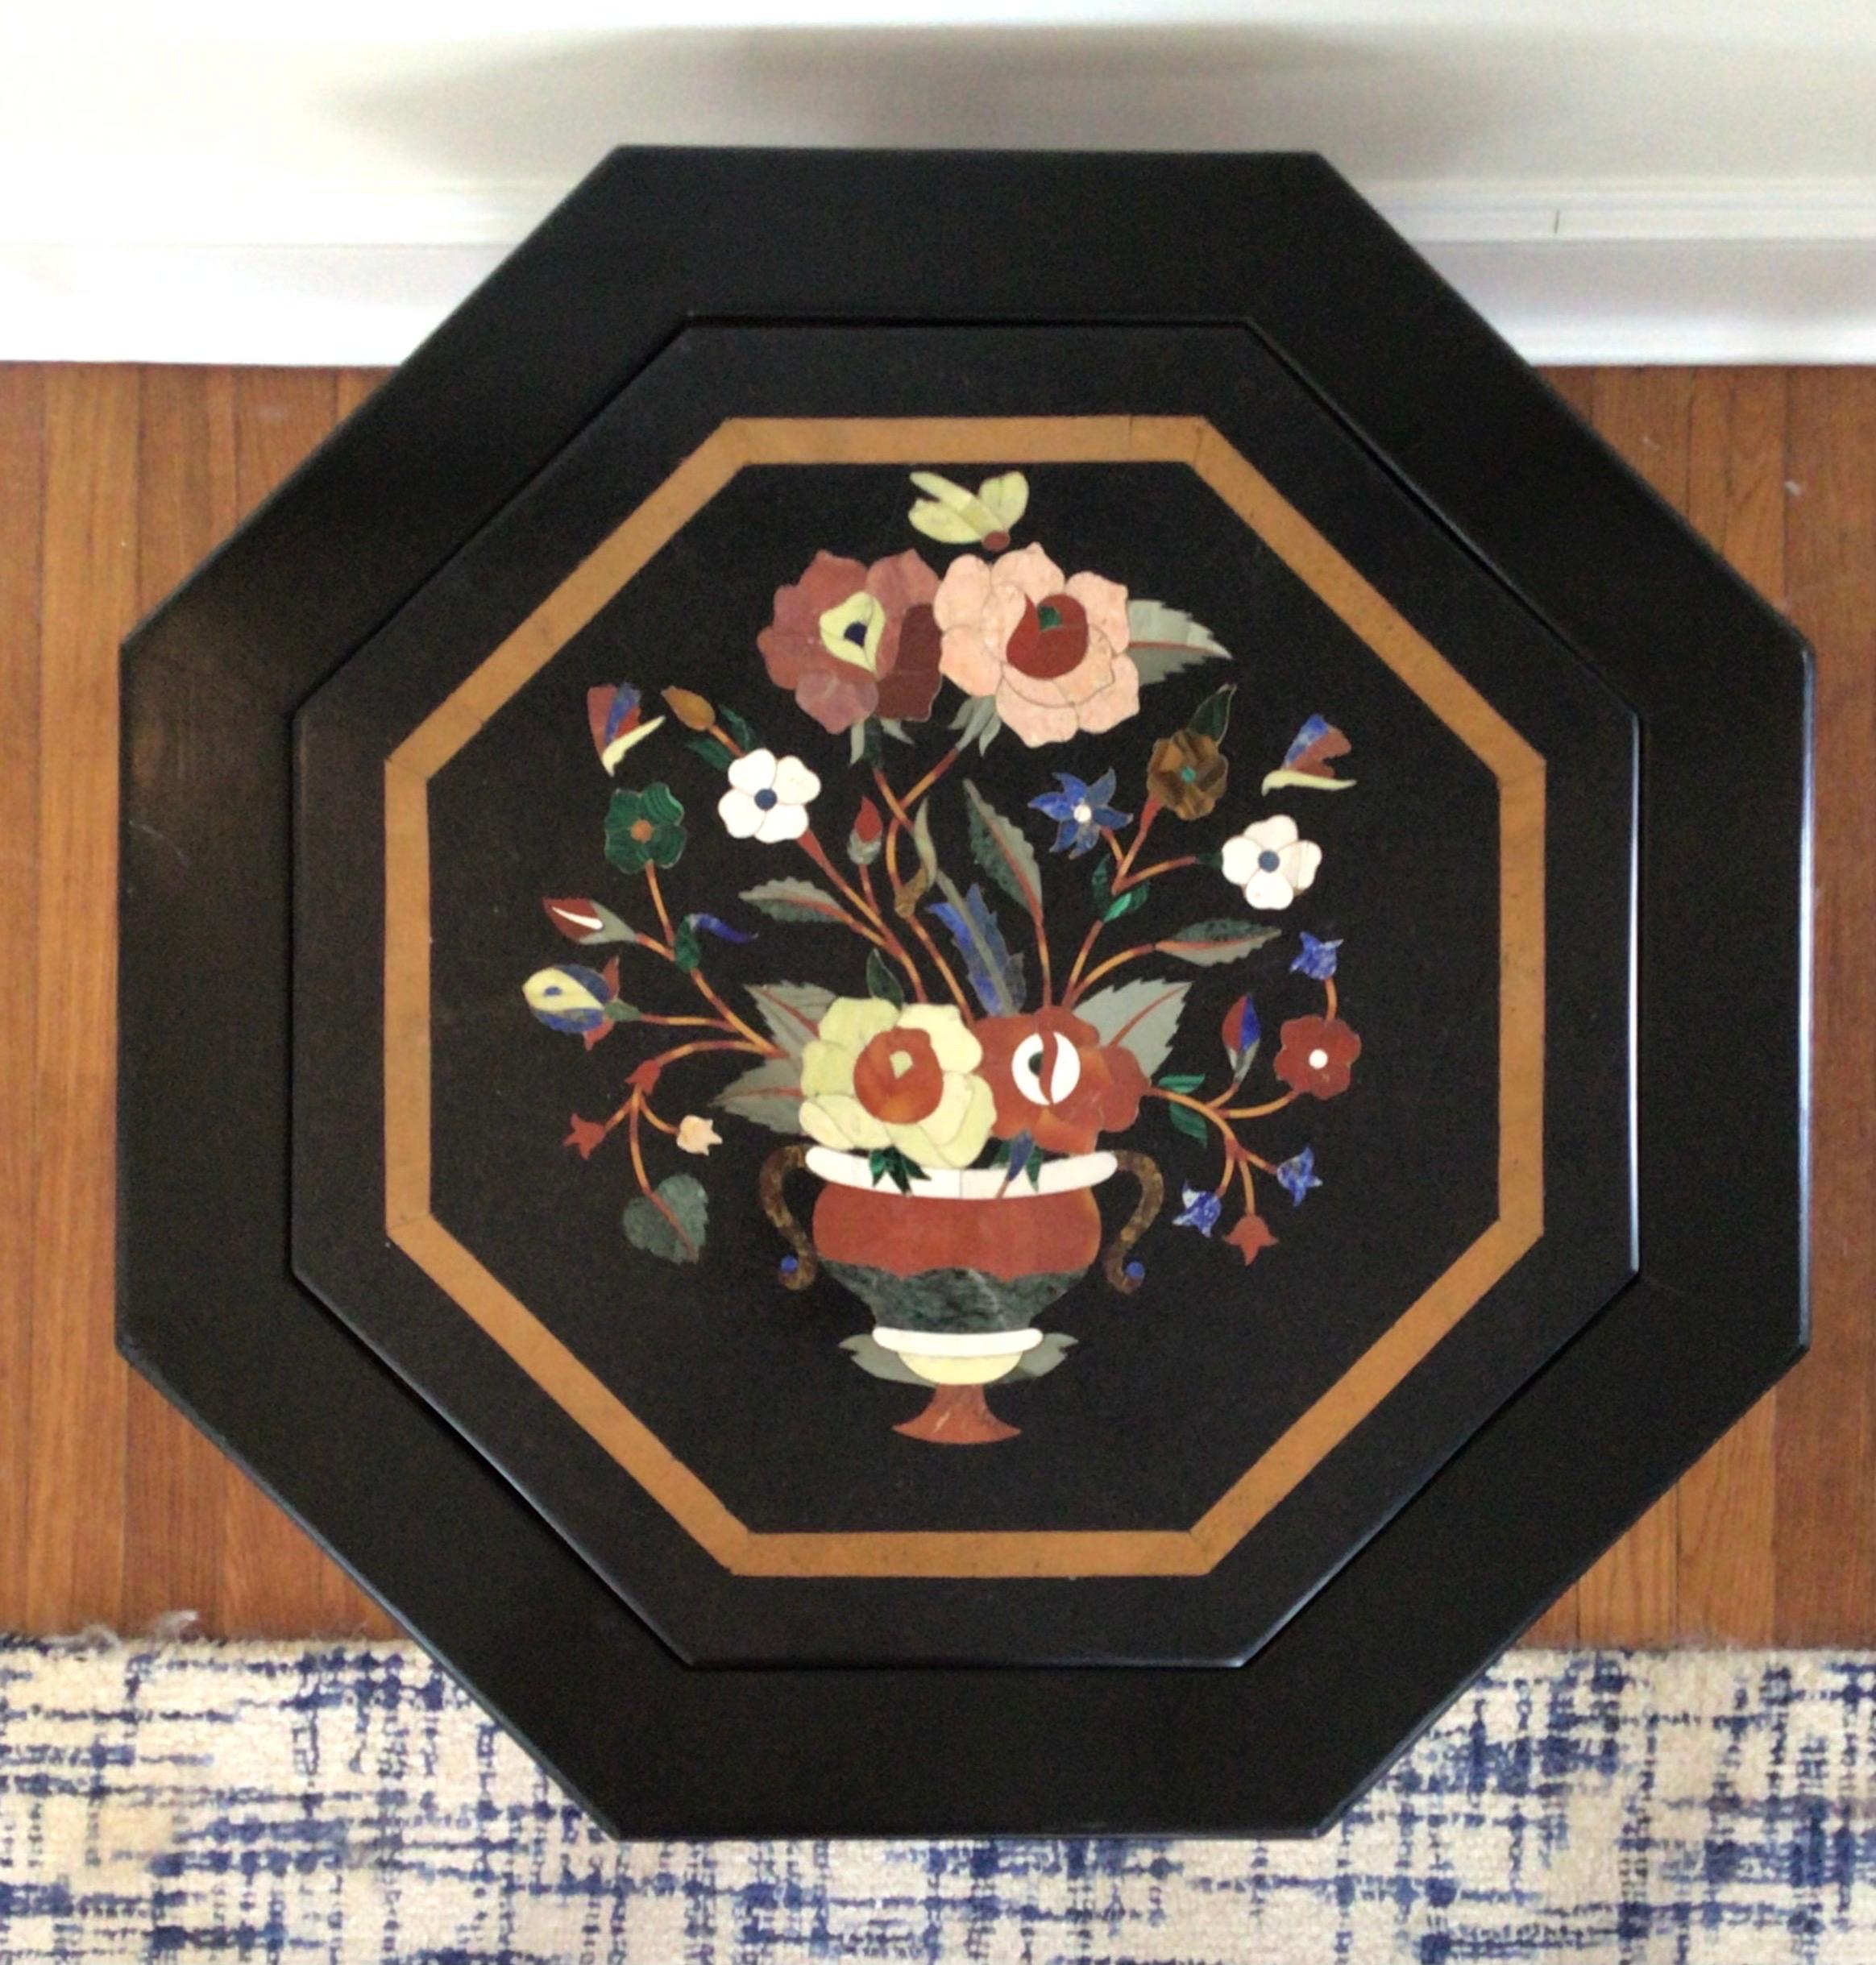 Unique octagonal lacquer coffee or cocktail table wit Pietra Dura insert. Wonderful colors and quality craftsmanship. Italian made.
Curbside to NYC/Philly $300